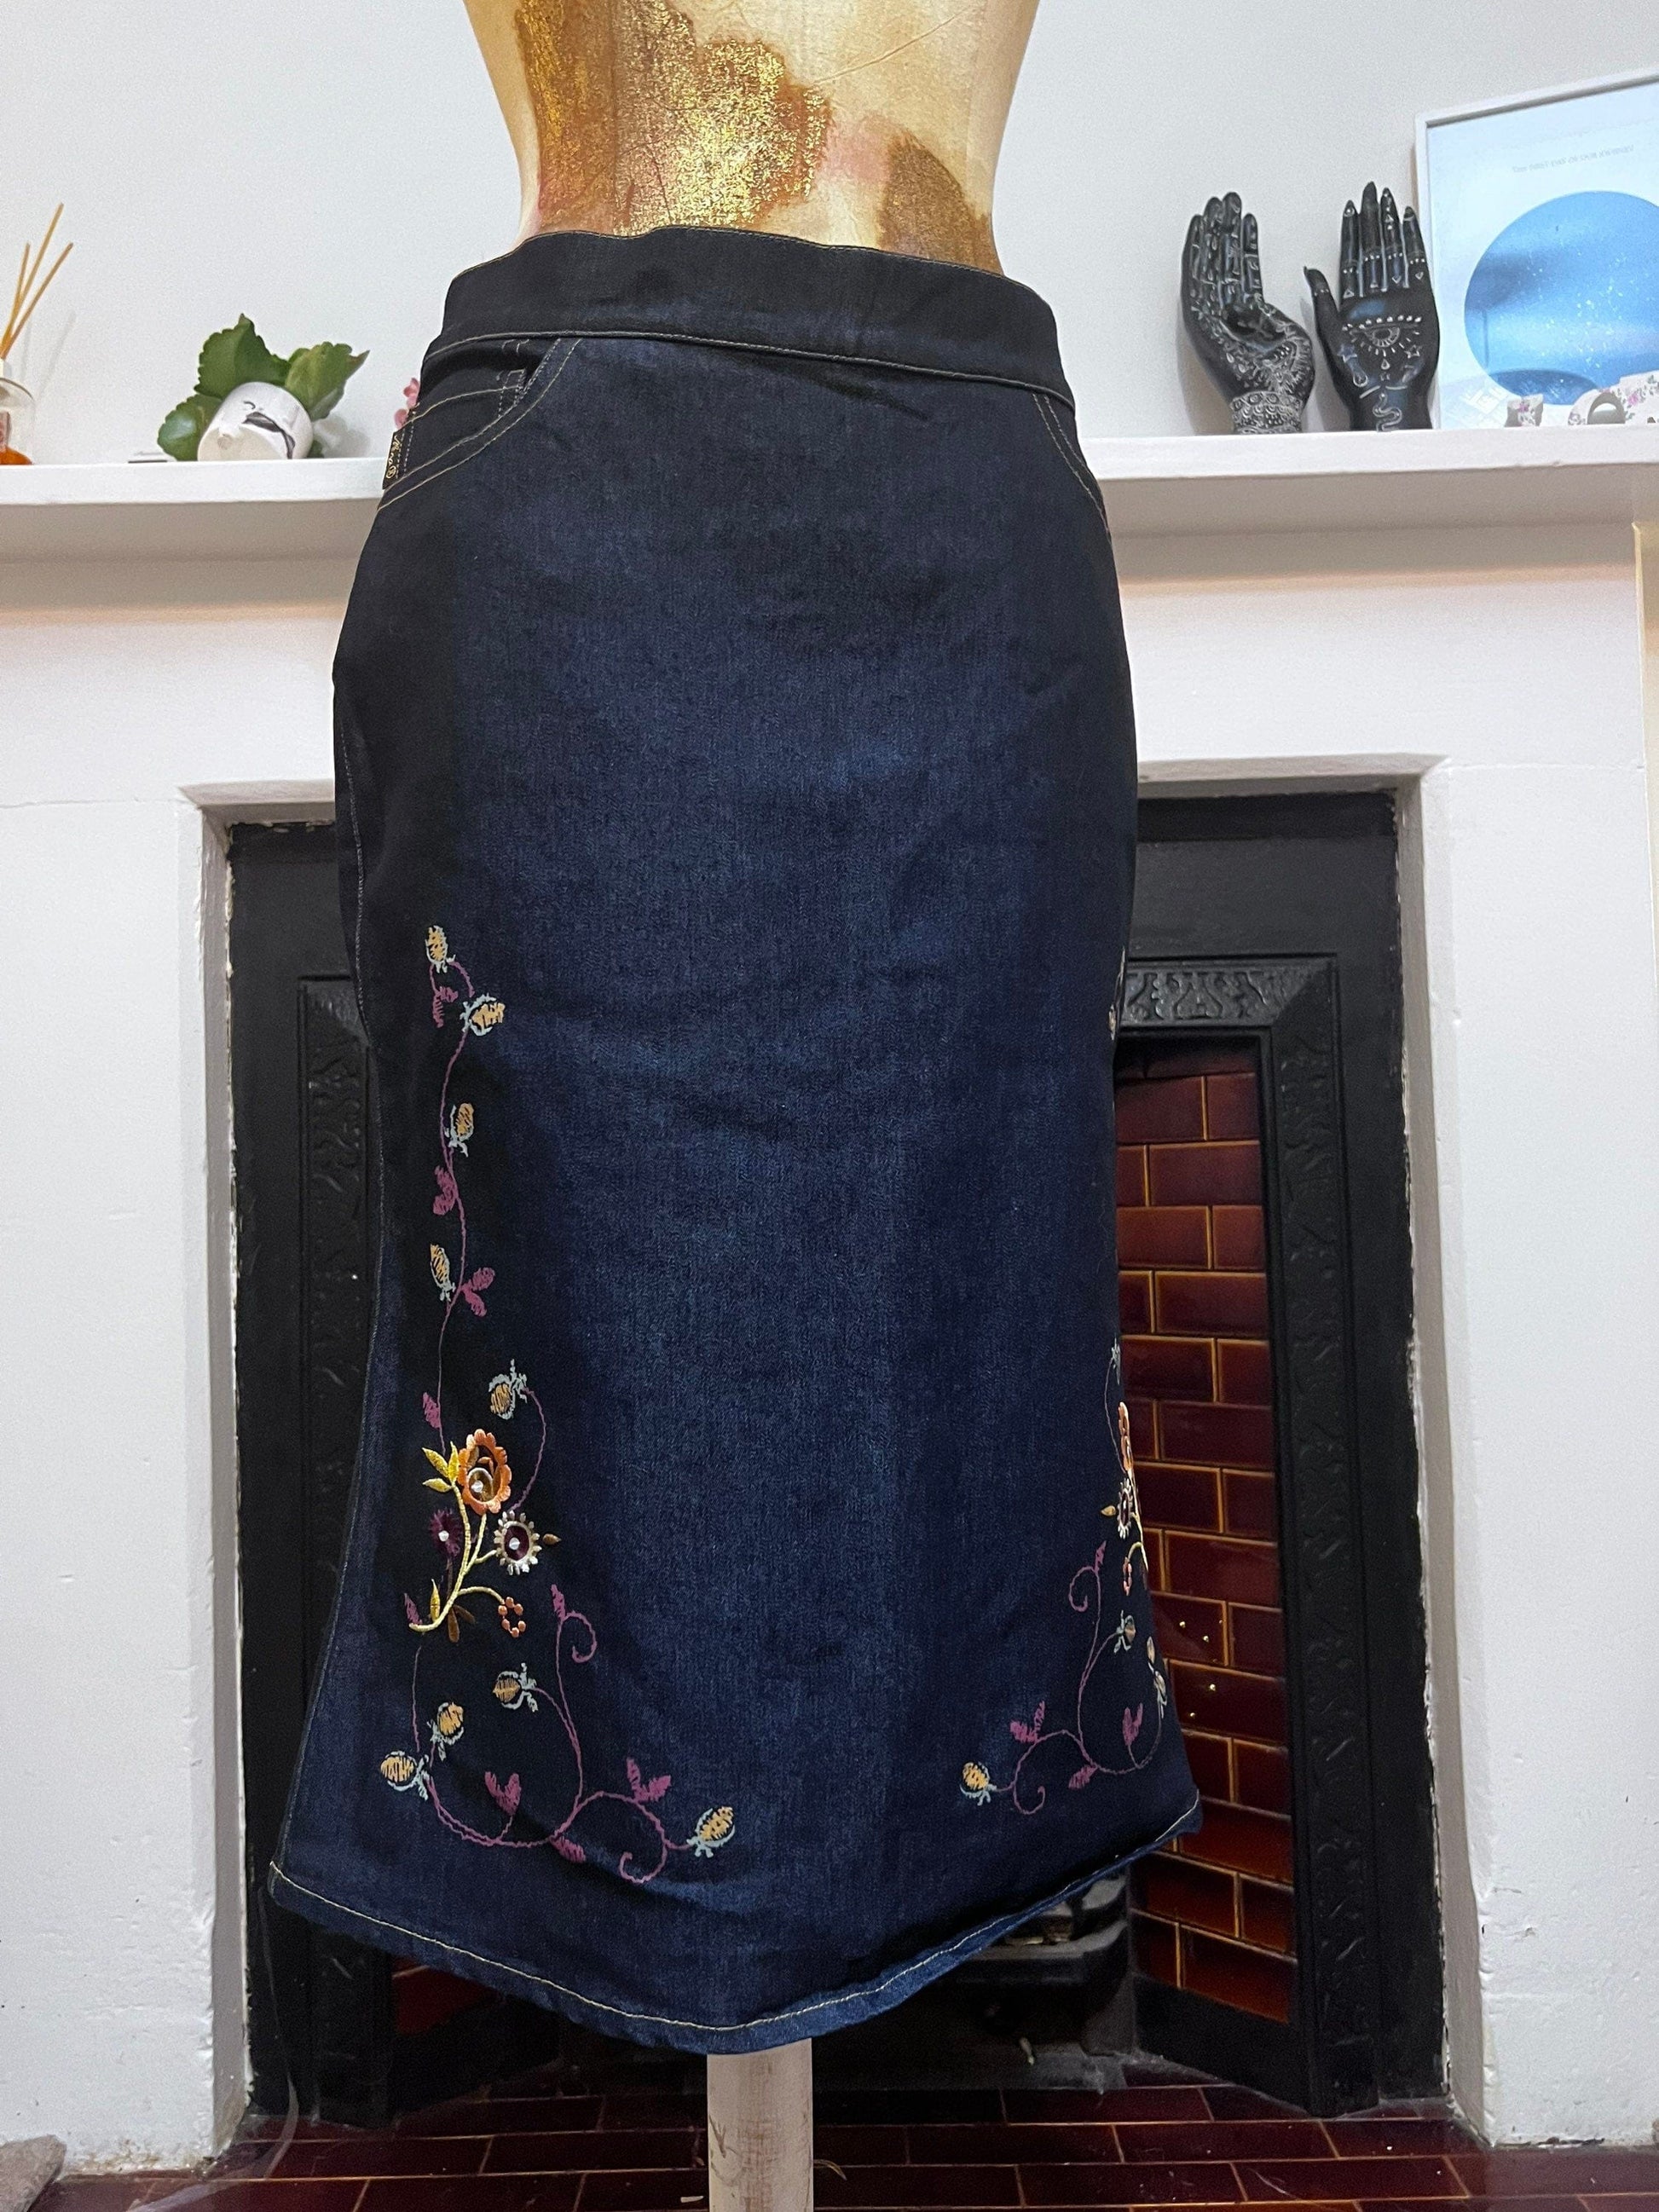 Vintage Blue Denim Embroidery Western Style Skirt - Corset back  - A-Line Blue Denim Skirt 90s Stretch Skirt with floral embroidery UK10